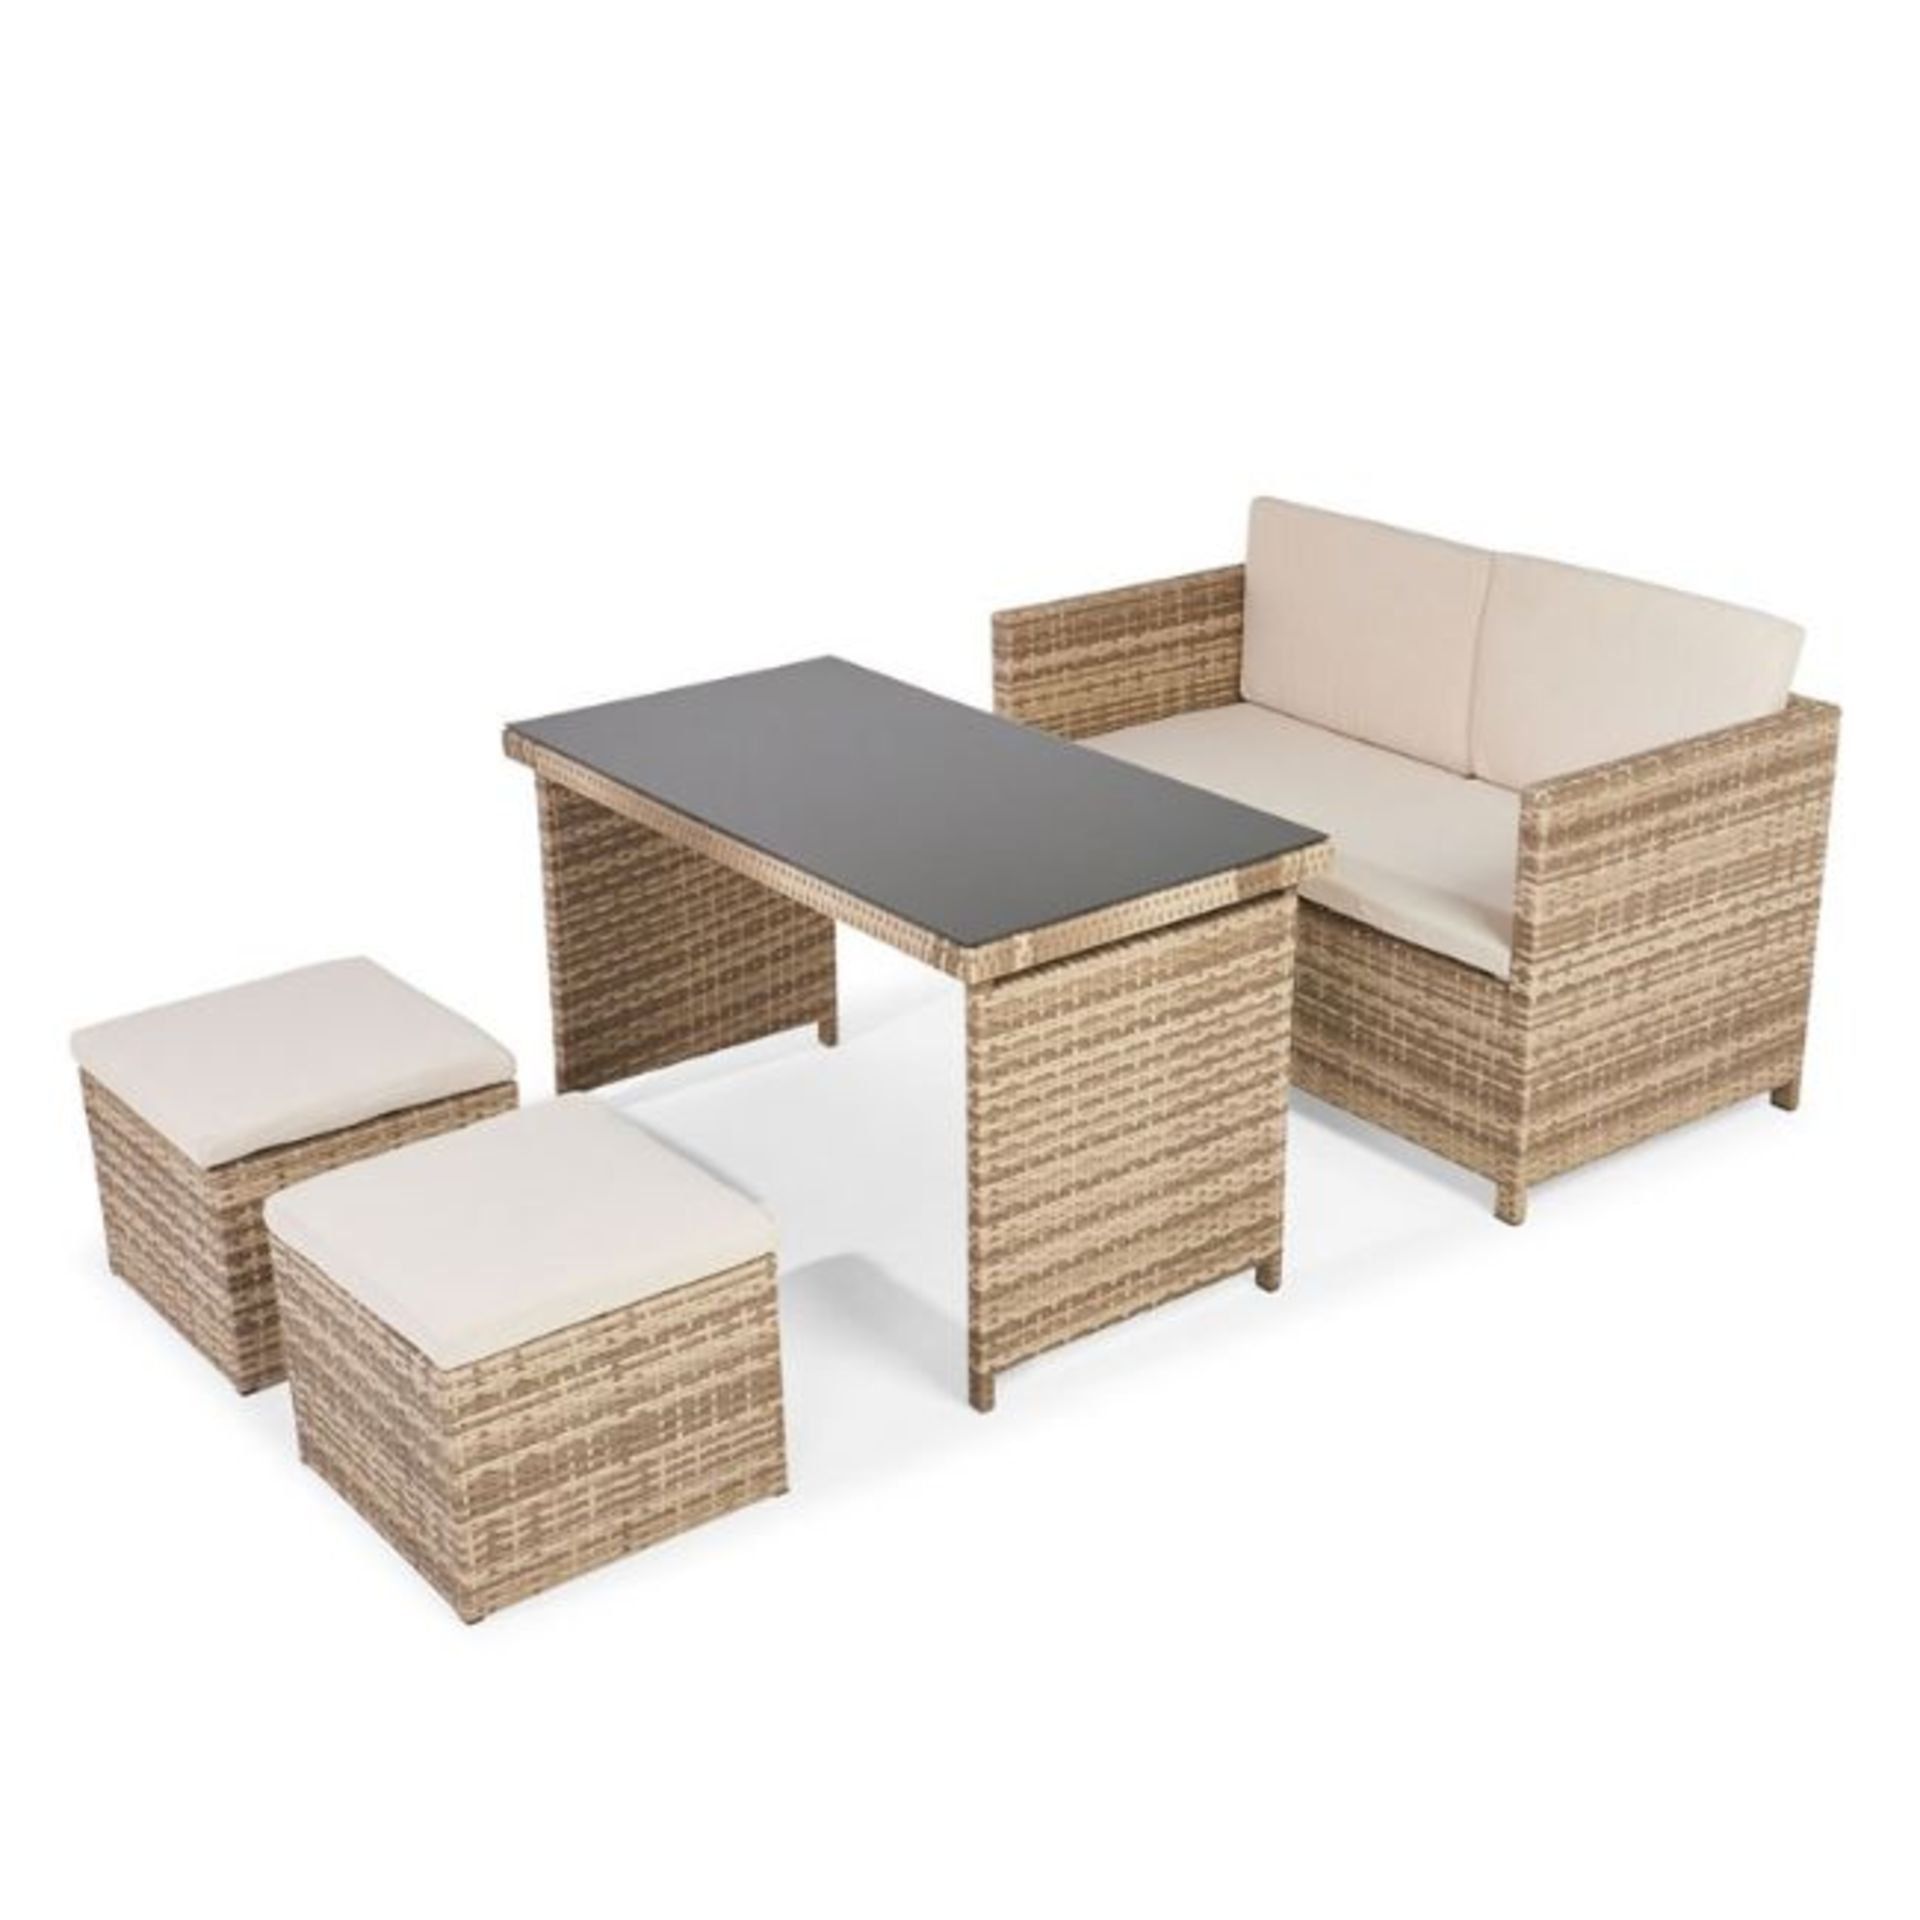 5 x ABLO Orion 4 Seater Rattan Dining Set - ABLOXLS018 - Image 2 of 2